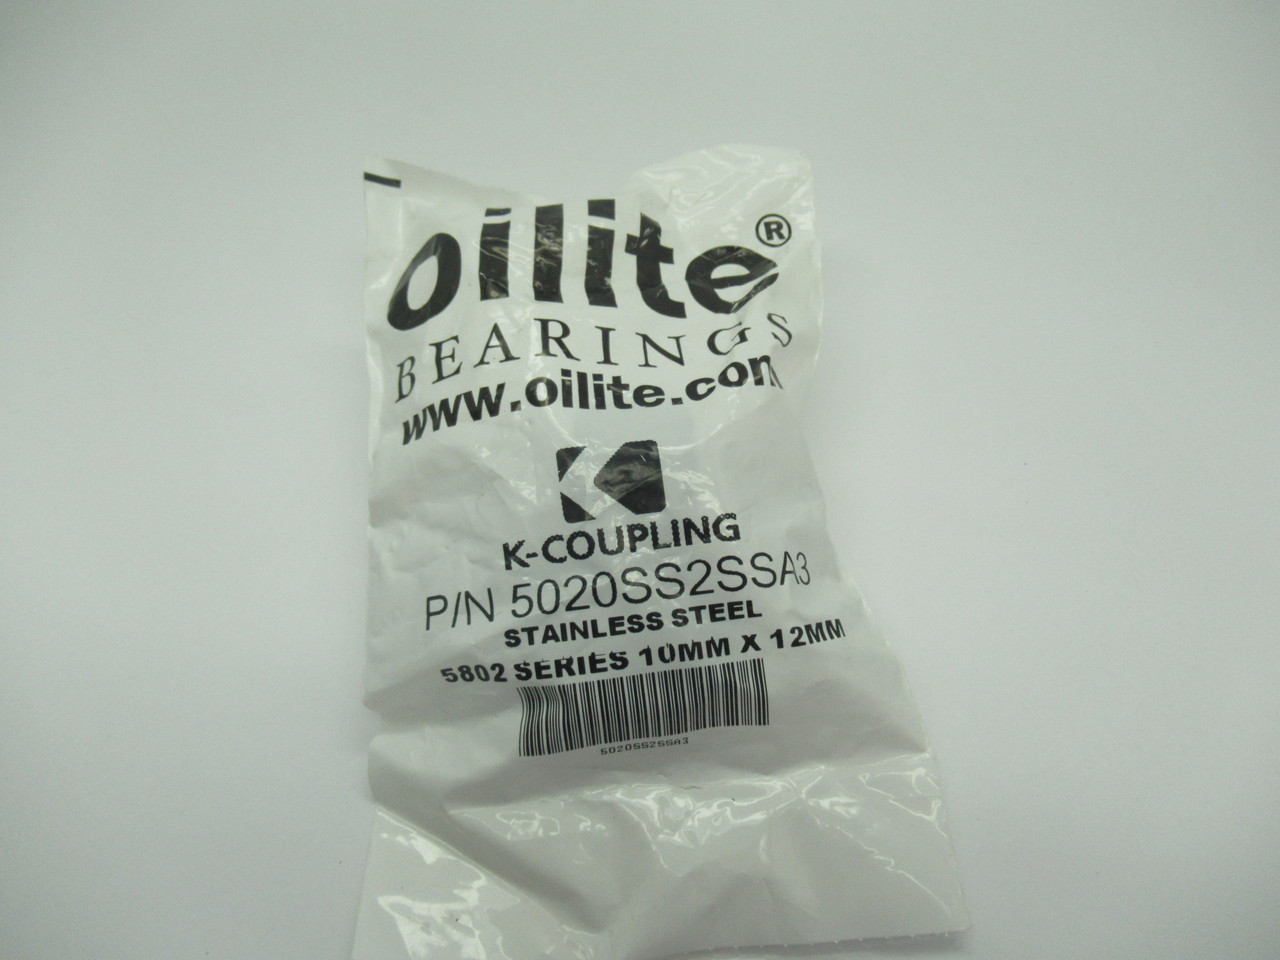 Oilite 5020SS2SSA3 K- Coupling Stainless Steel 10mm x12mm NWB